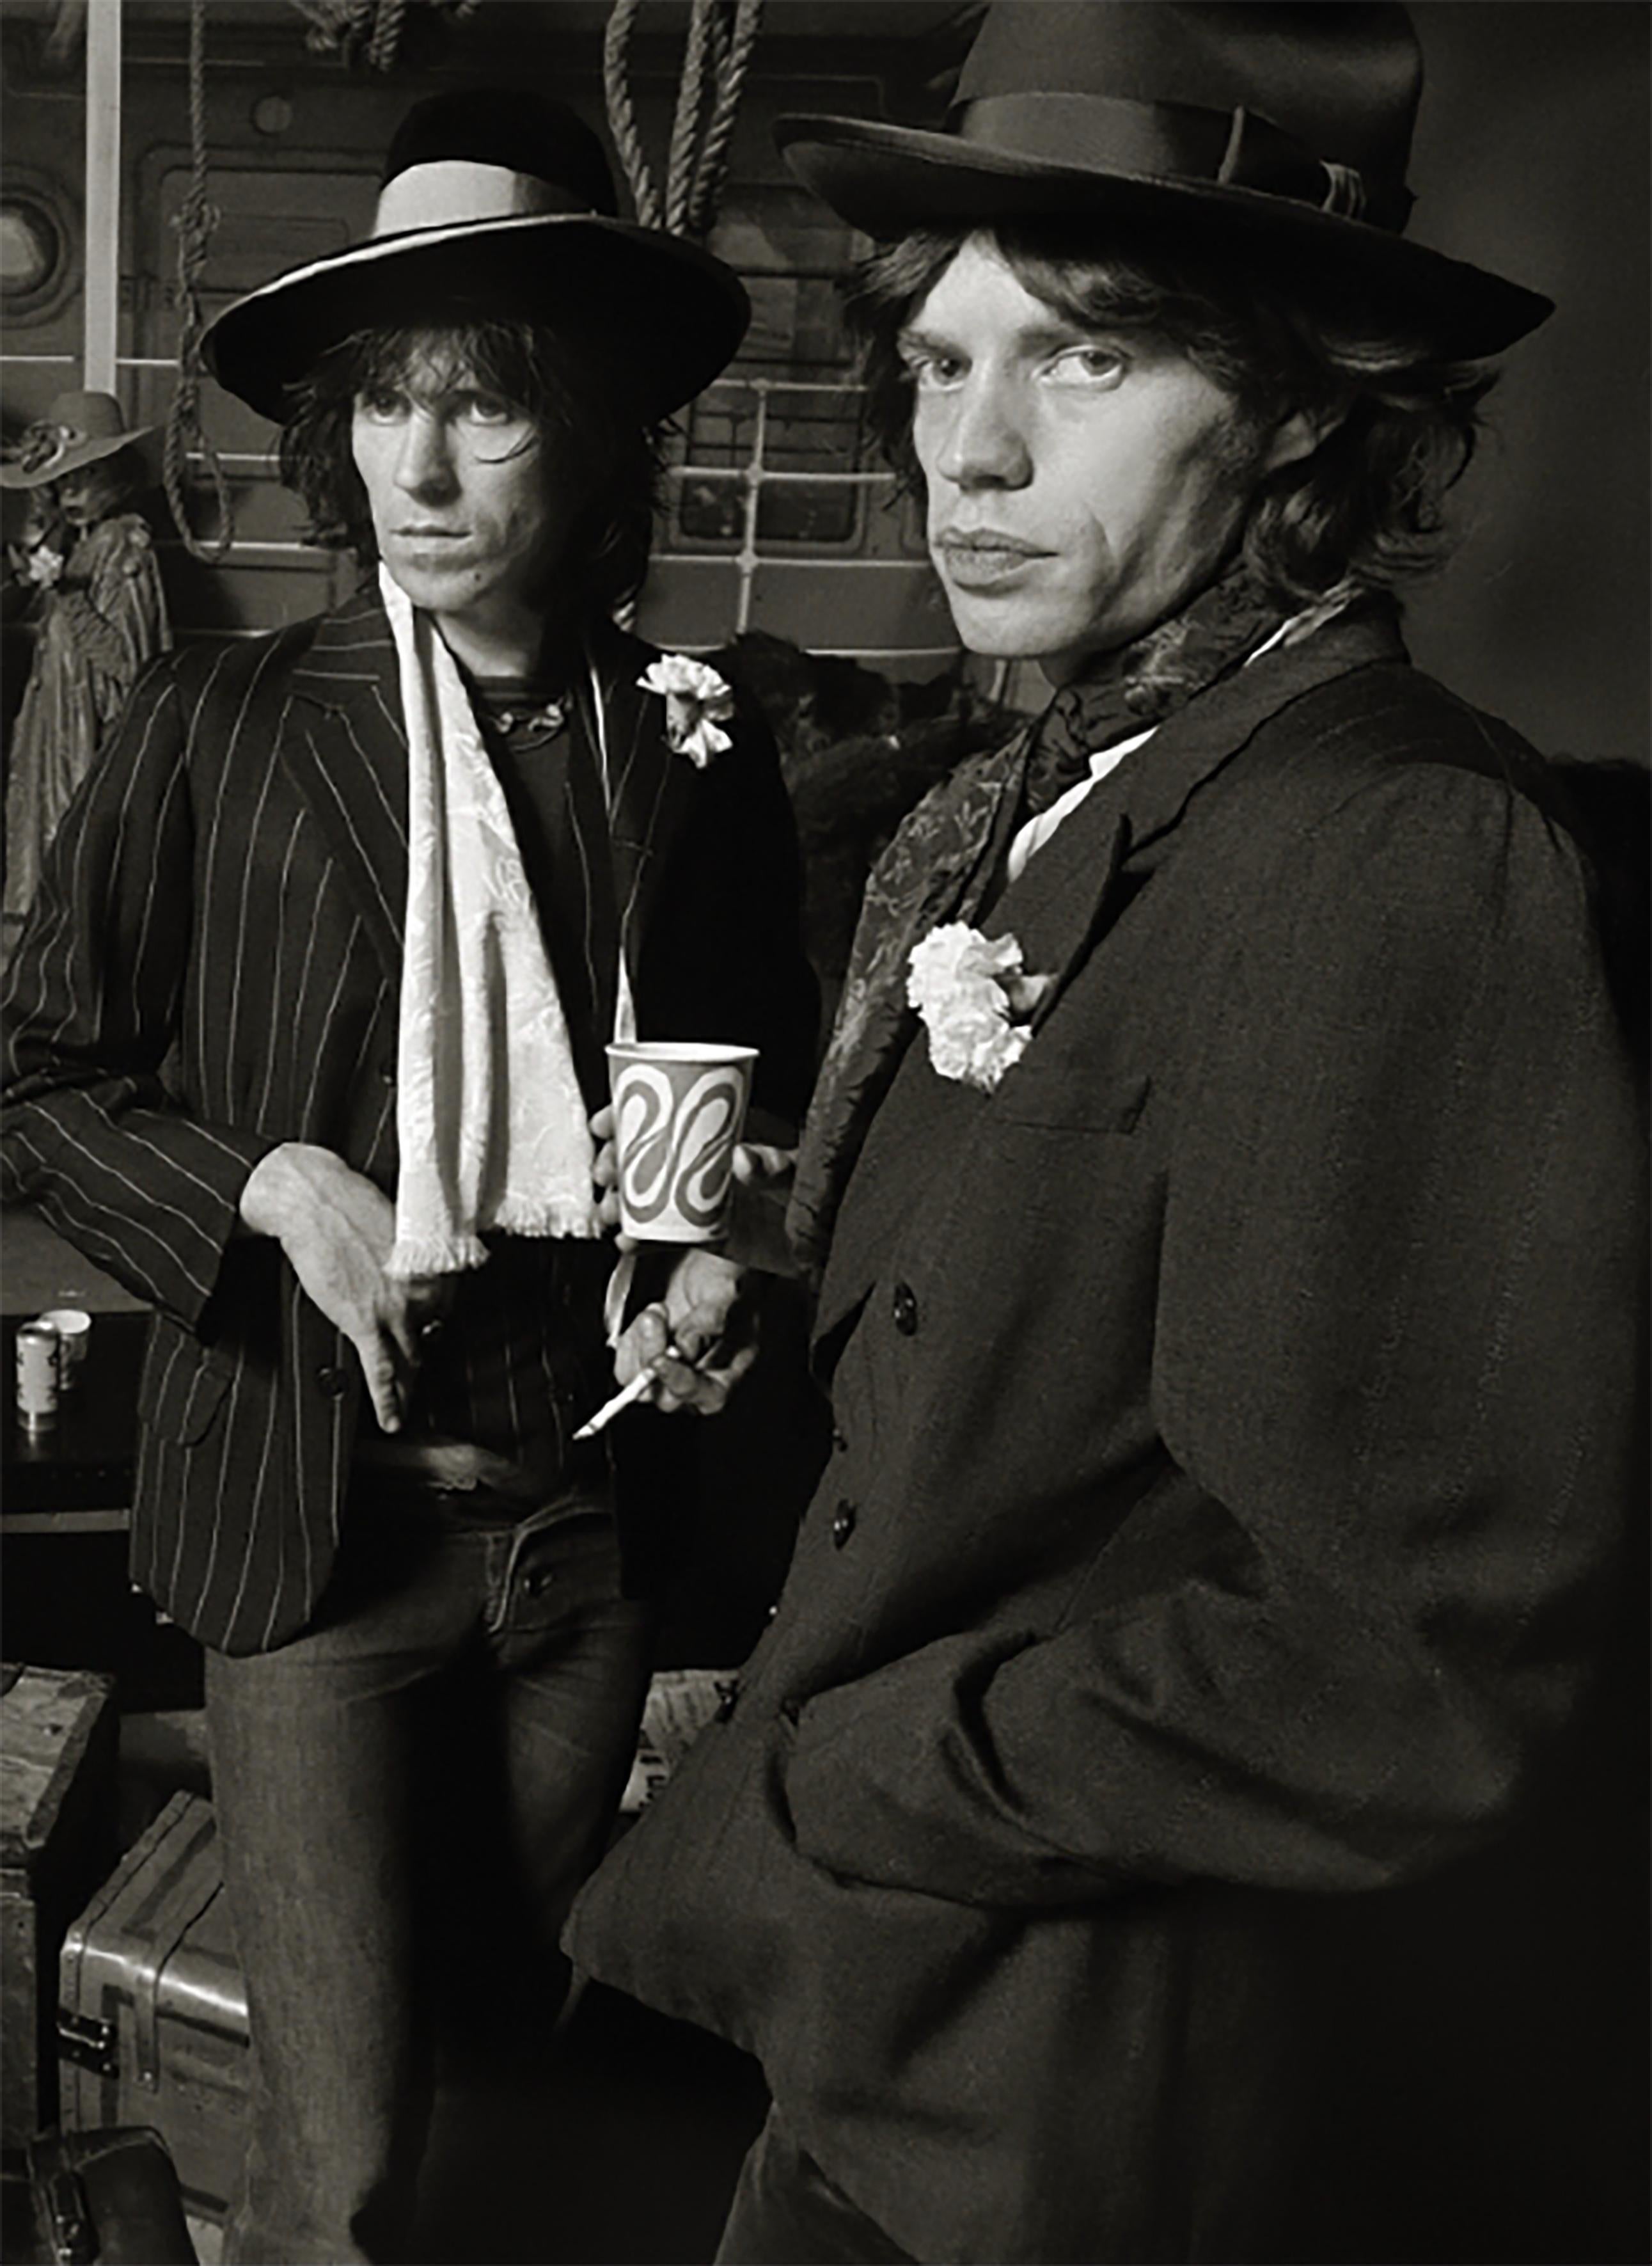 Norman Seeff Color Photograph - Keith Richards and Mick Jagger, Exile On Mainstreet, 1971